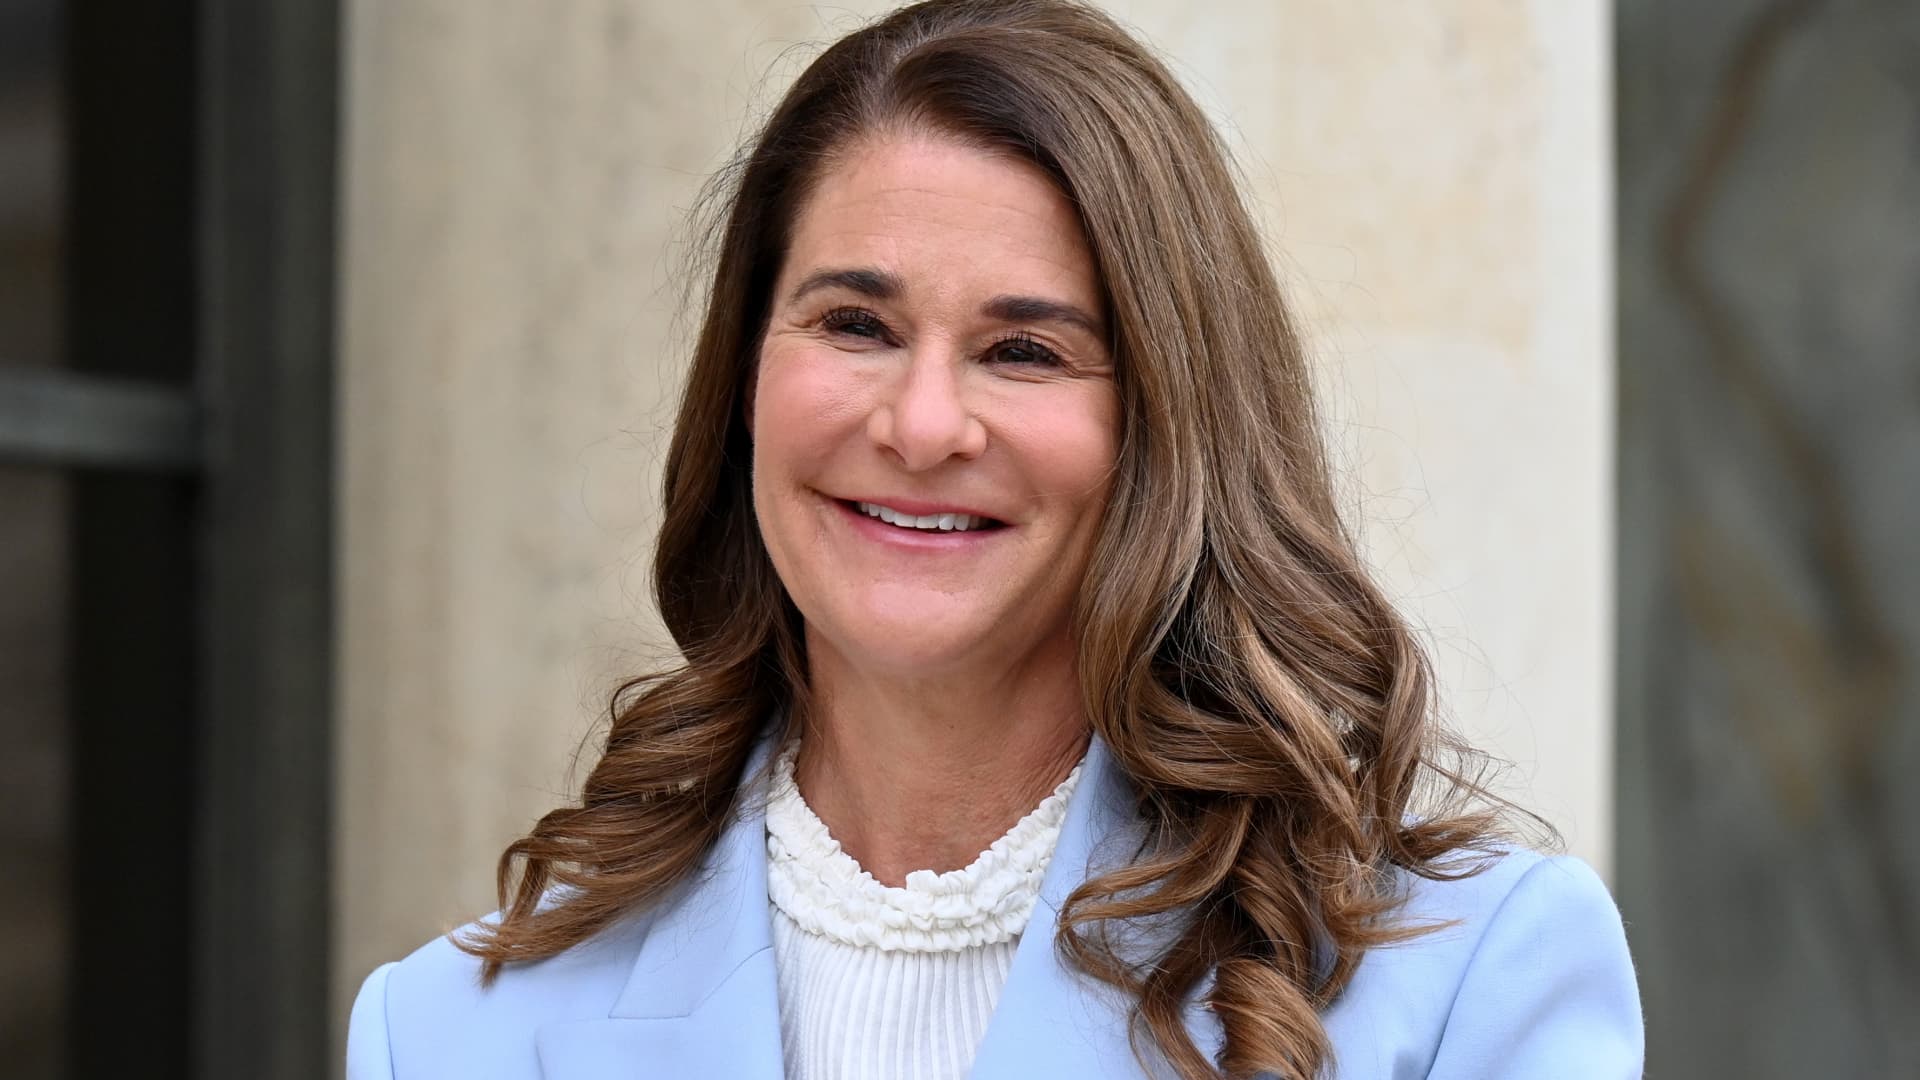 Melinda French Gates to resign from Gates Foundation, will pursue own philanthropy with .5 billion grant